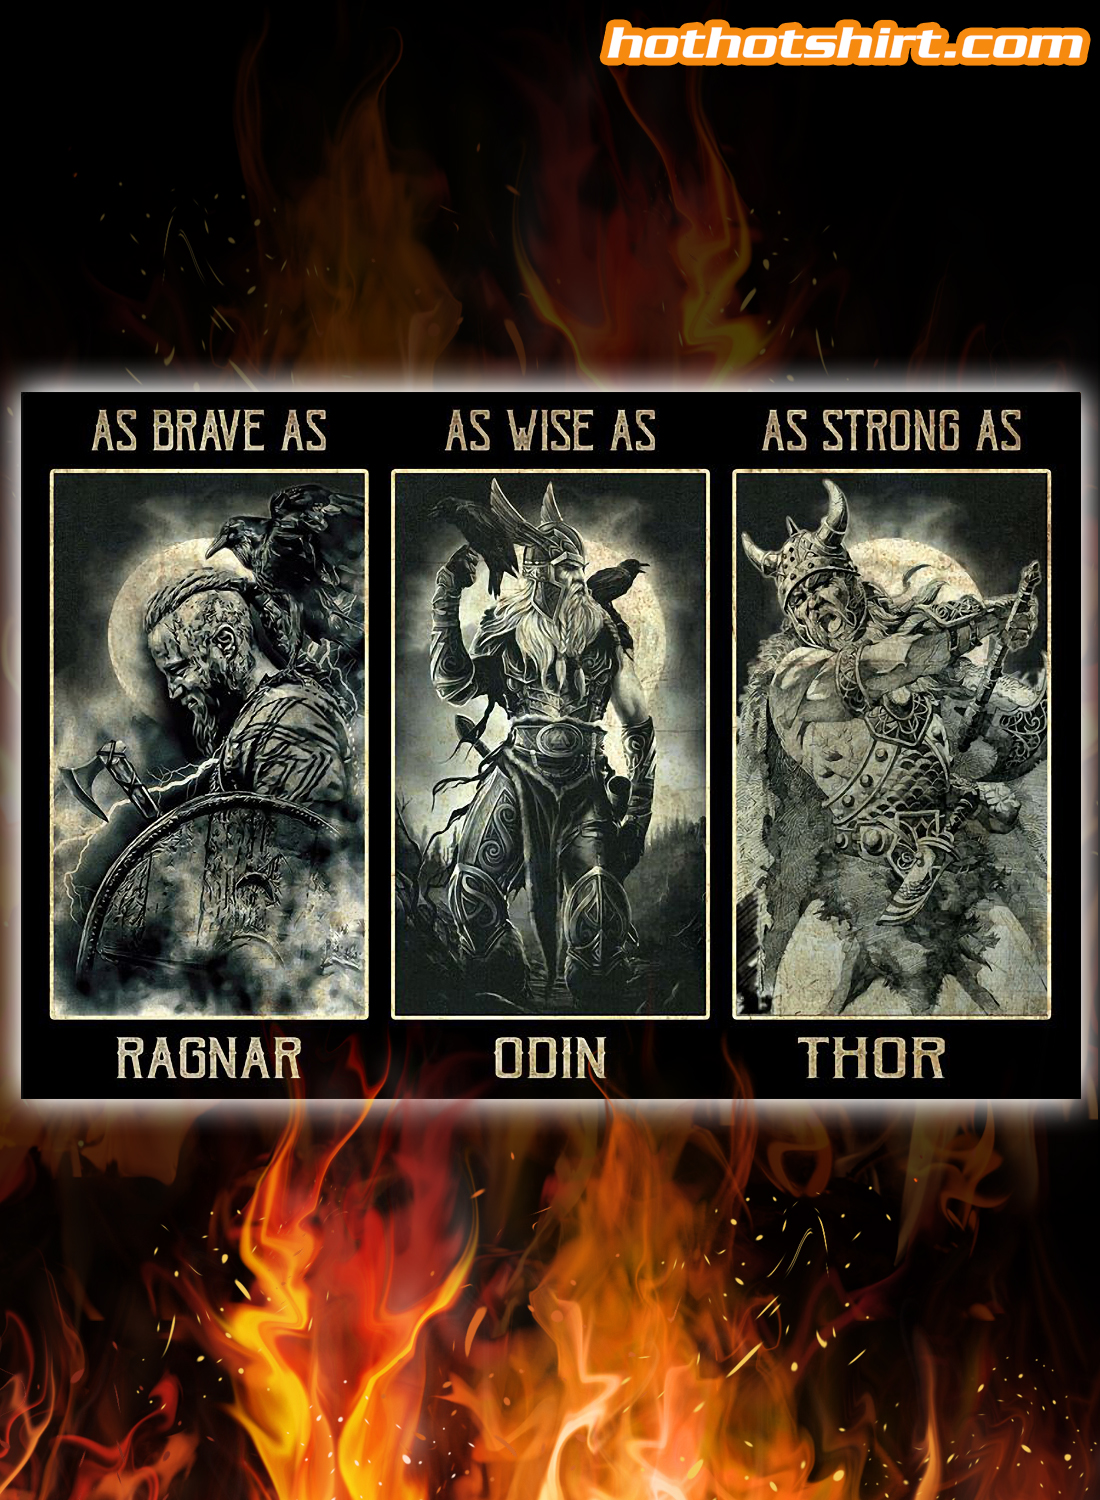 Viking as brave as ragna as wise as odin as strong as thor poster